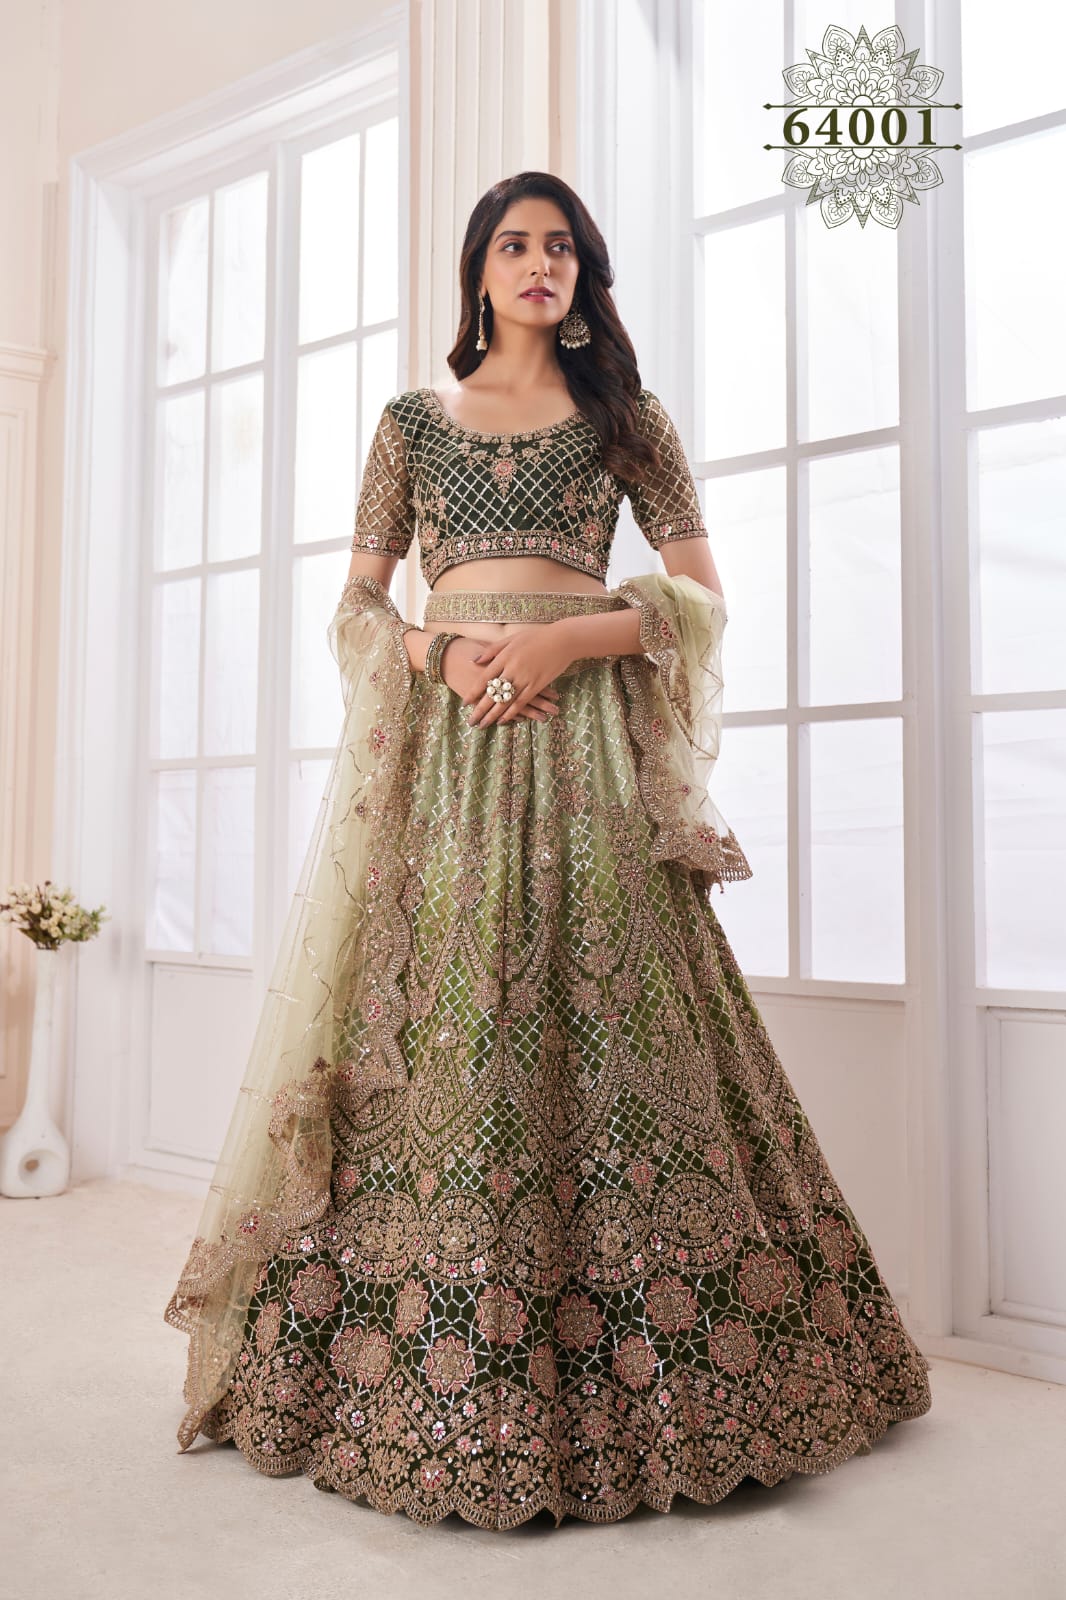 Arya Vol.46 D.No.64001 Designer Occasion Wear Lehenga Anant Tex Exports Private Limited